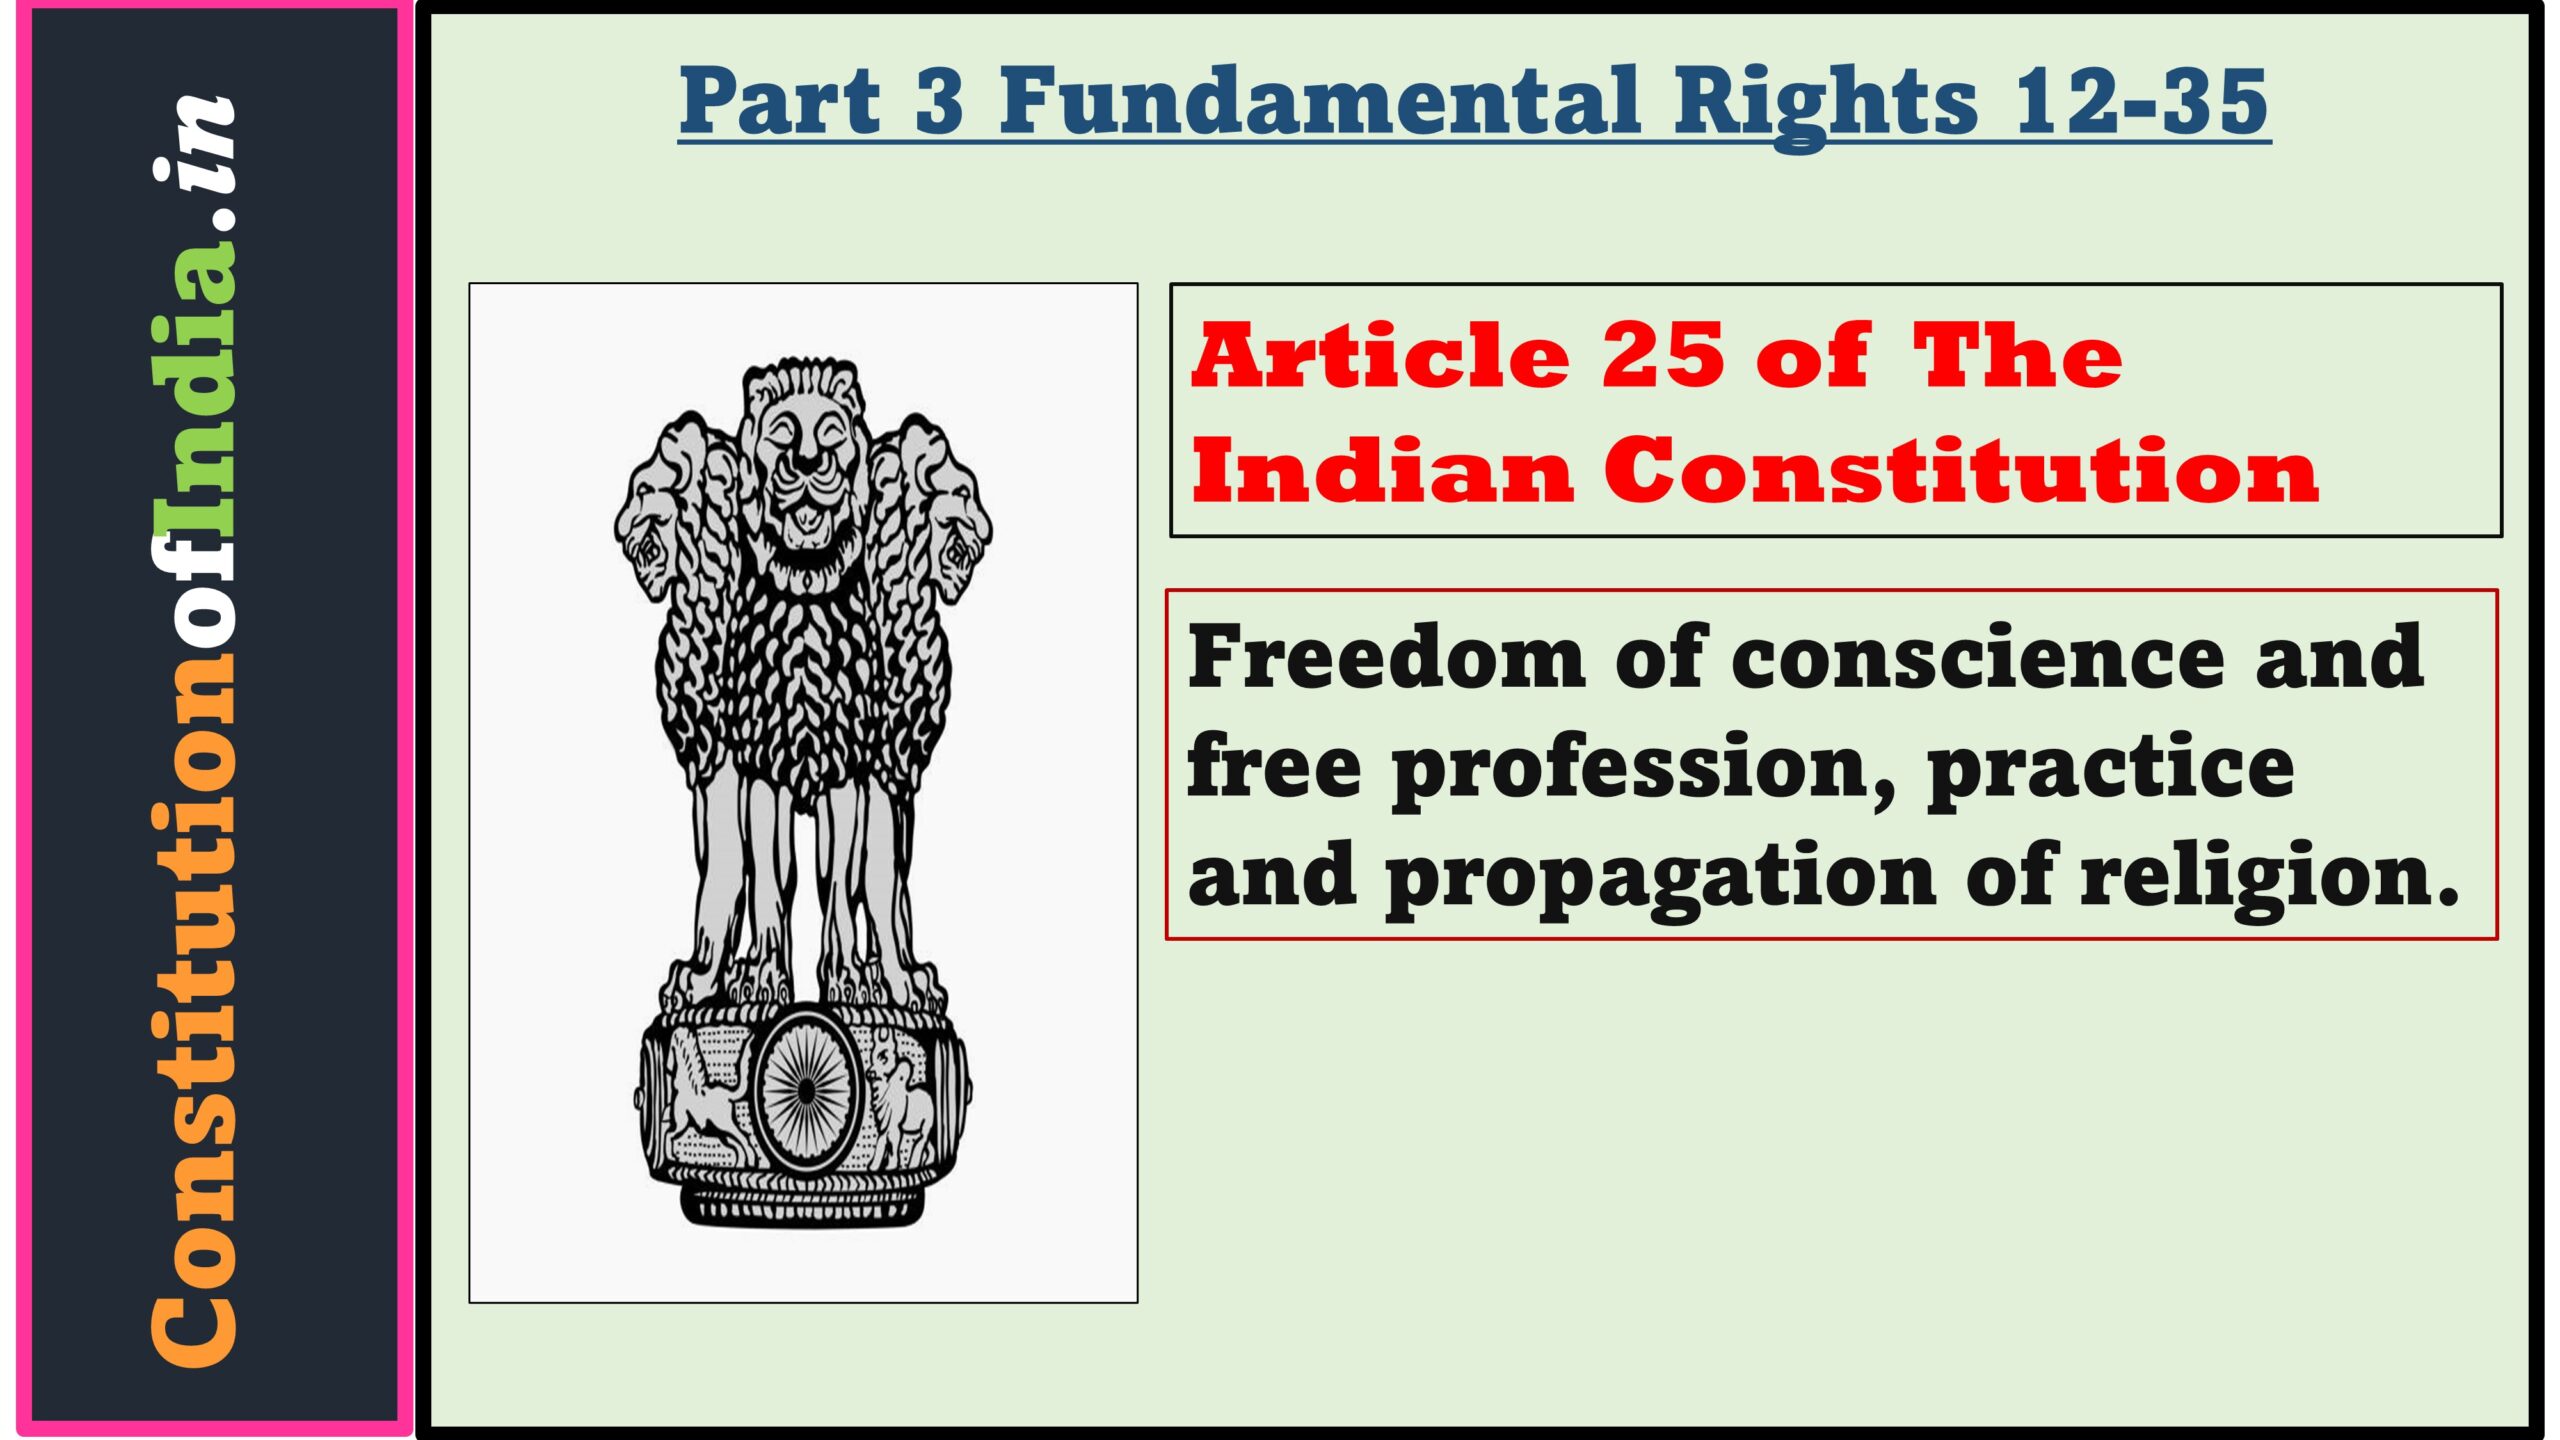 Article 25 of Indian Constitution Right to Freedom of Religion